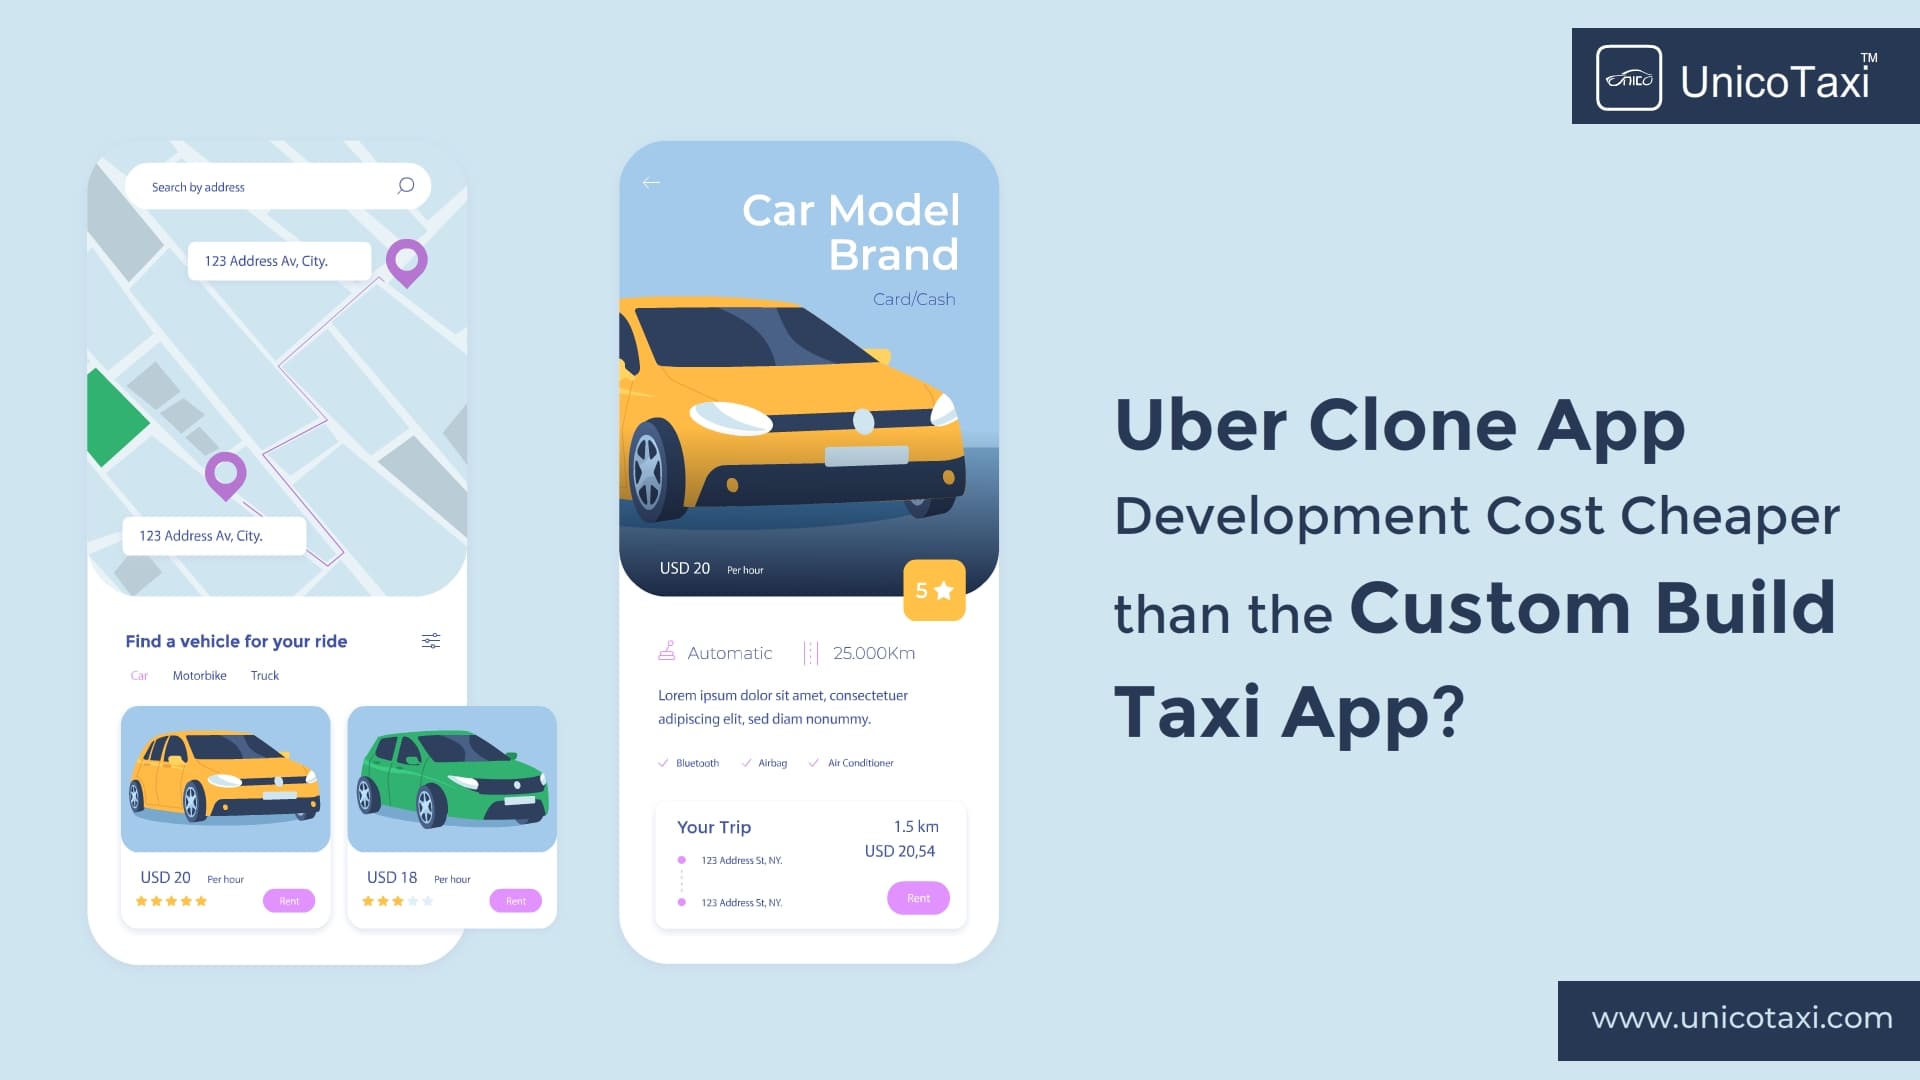 Why the Uber Clone App Development Cost Cheaper than the Custom Build Taxi App?